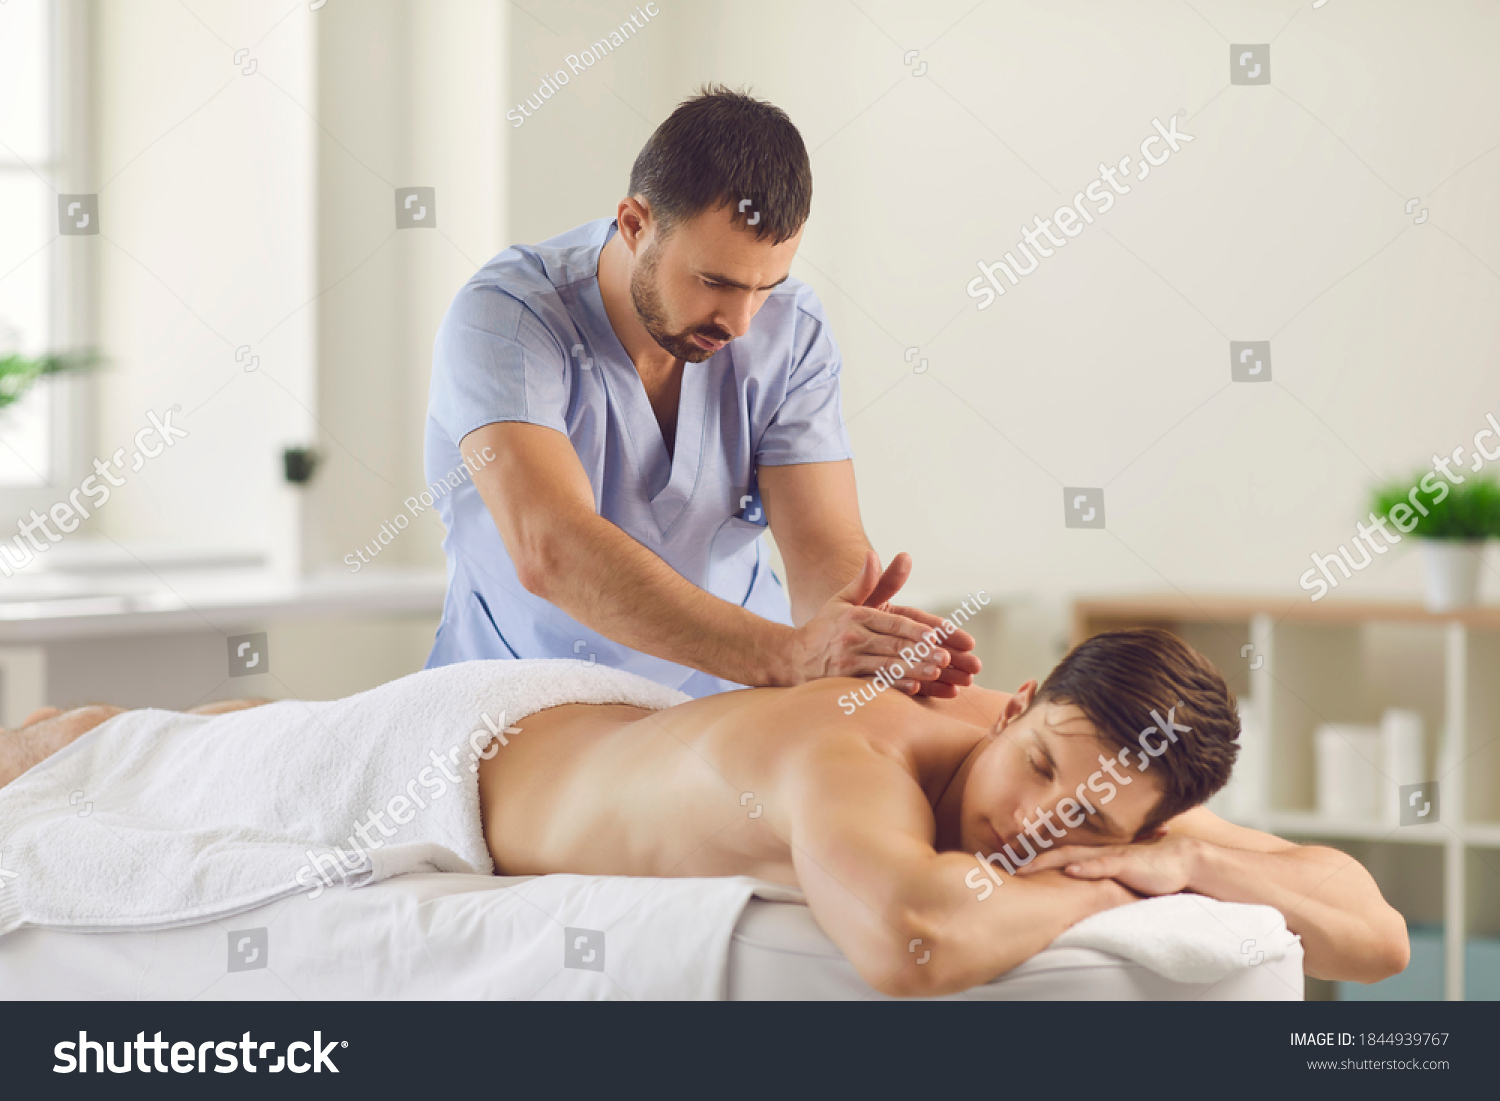 Relieving back muscle tension. Professional masseur massaging young man's back using Tapotement or chopping, tapping or hacking technique during Swedish massage therapy in spa salon or wellness center #1844939767